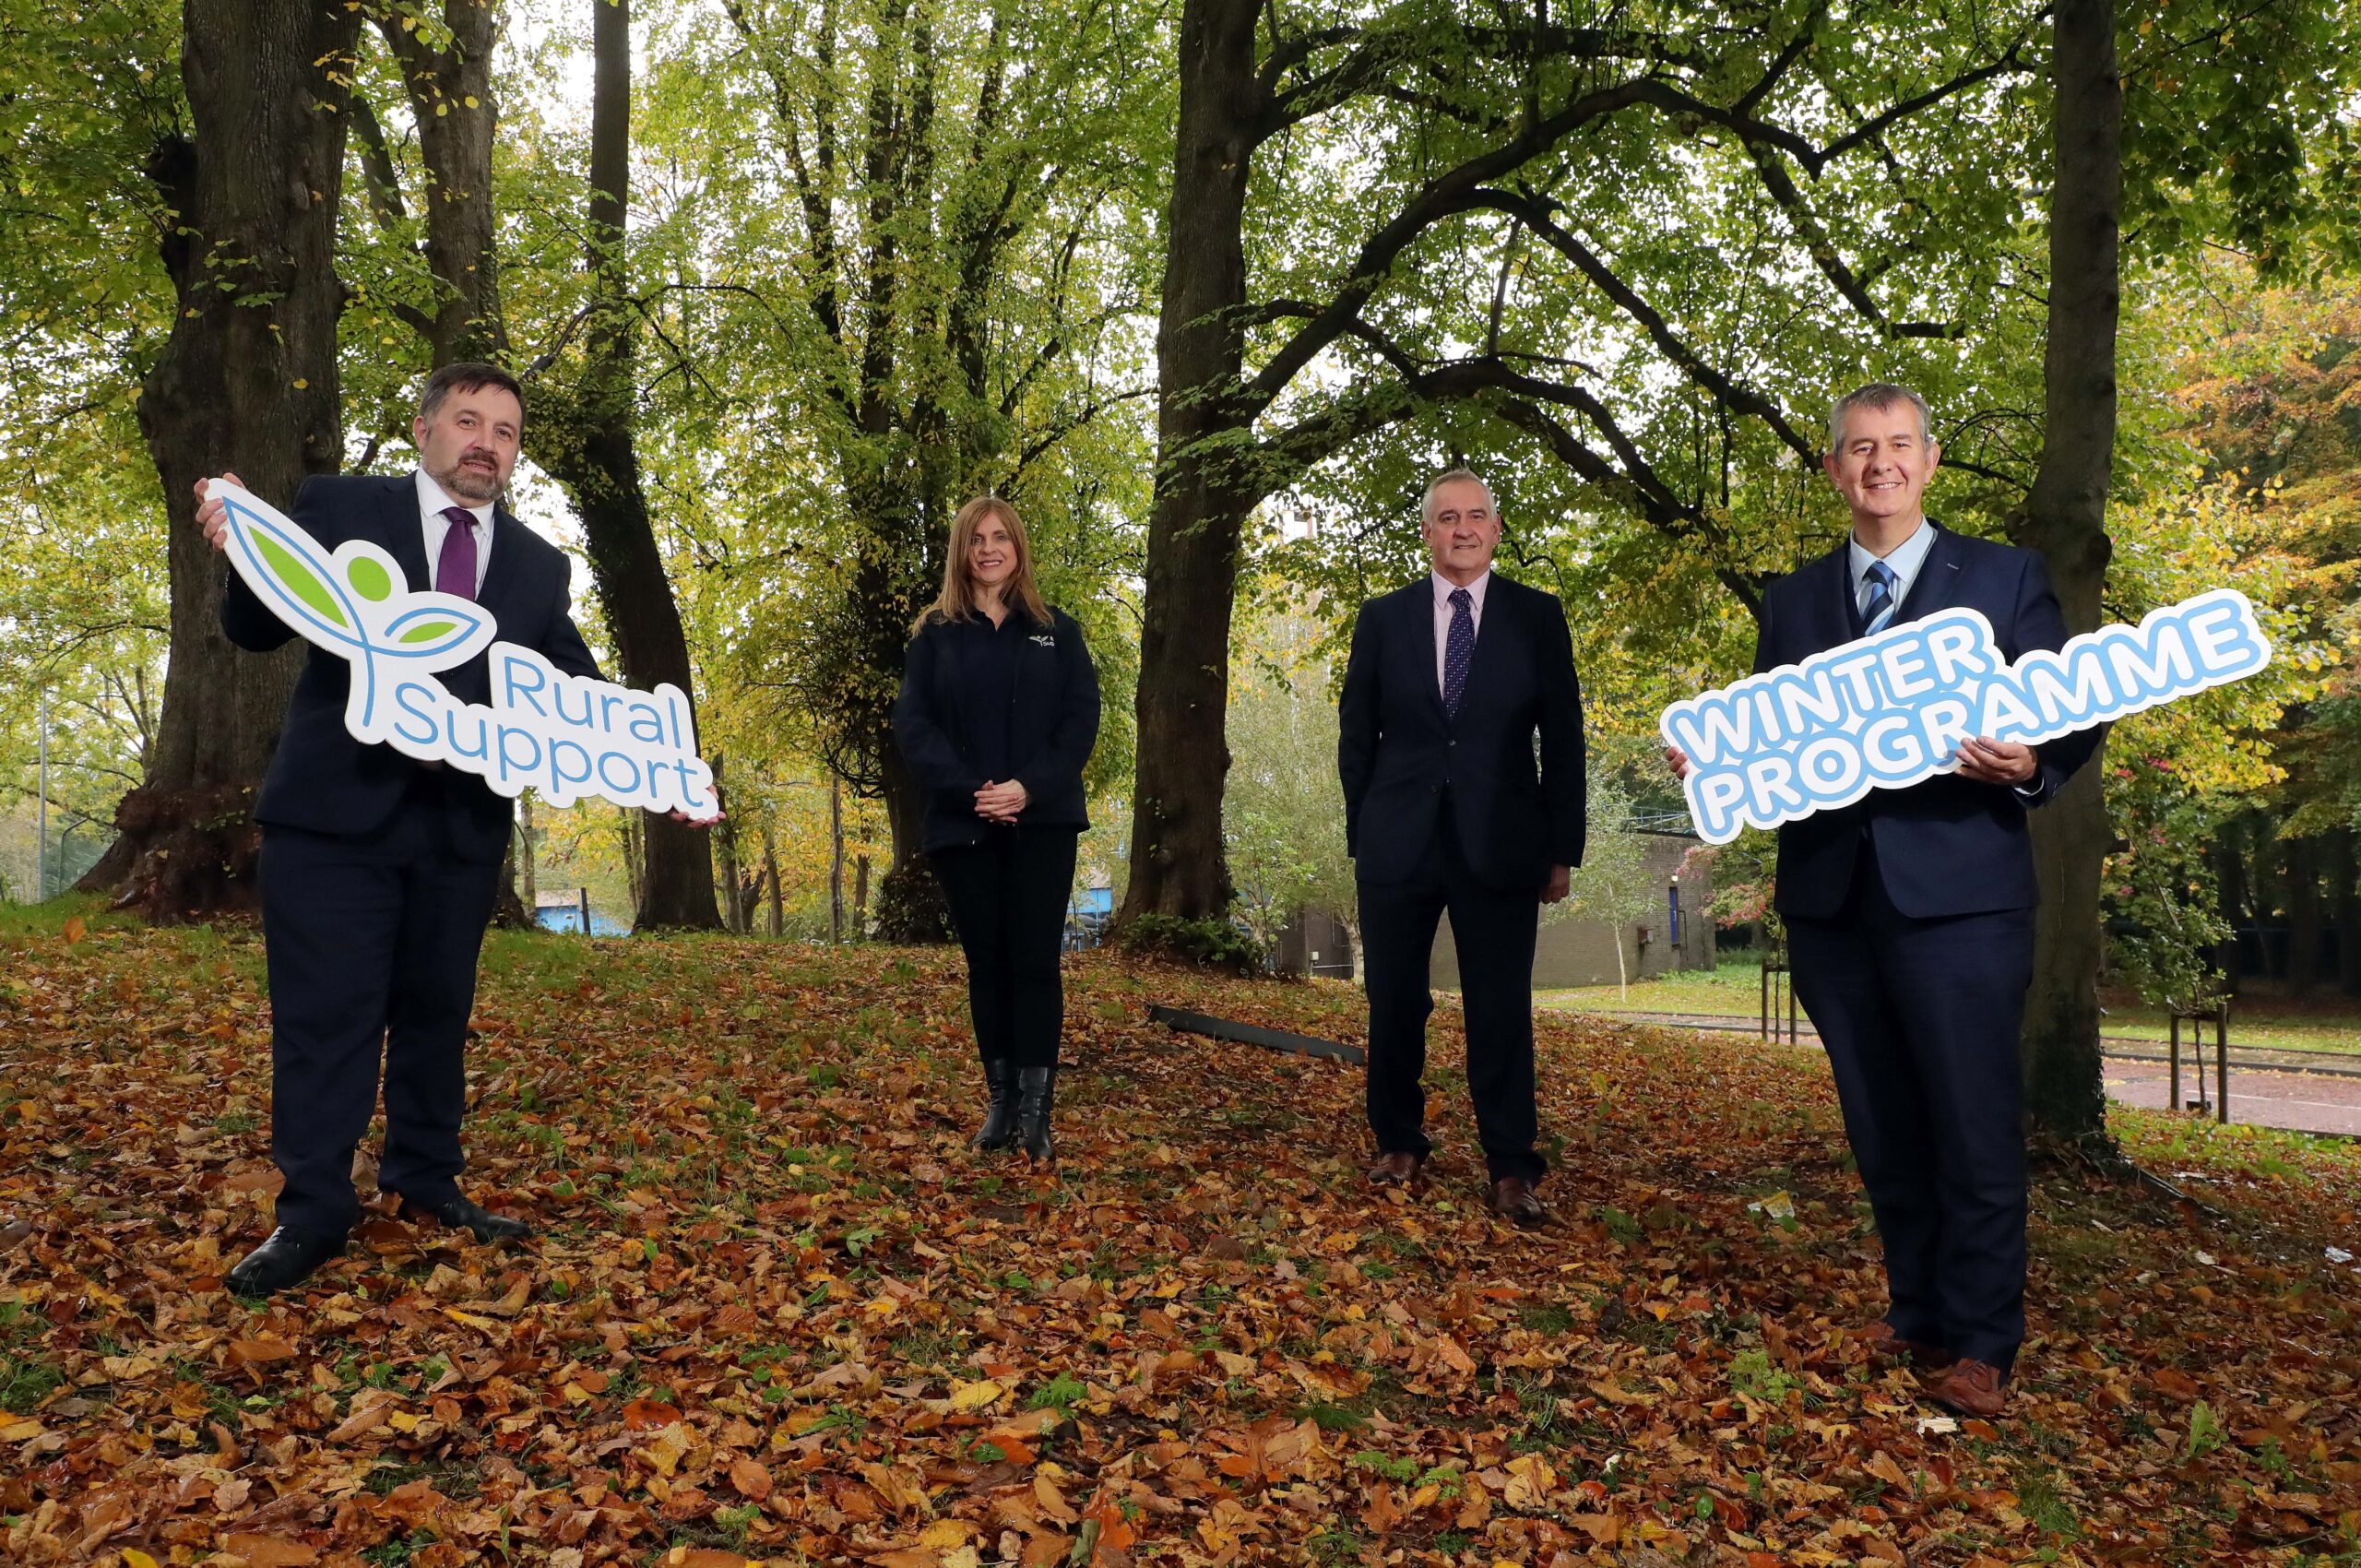 Ministers Poots and Swann Launch Rural Support’s New Winter Programme - Newry Times newspaper